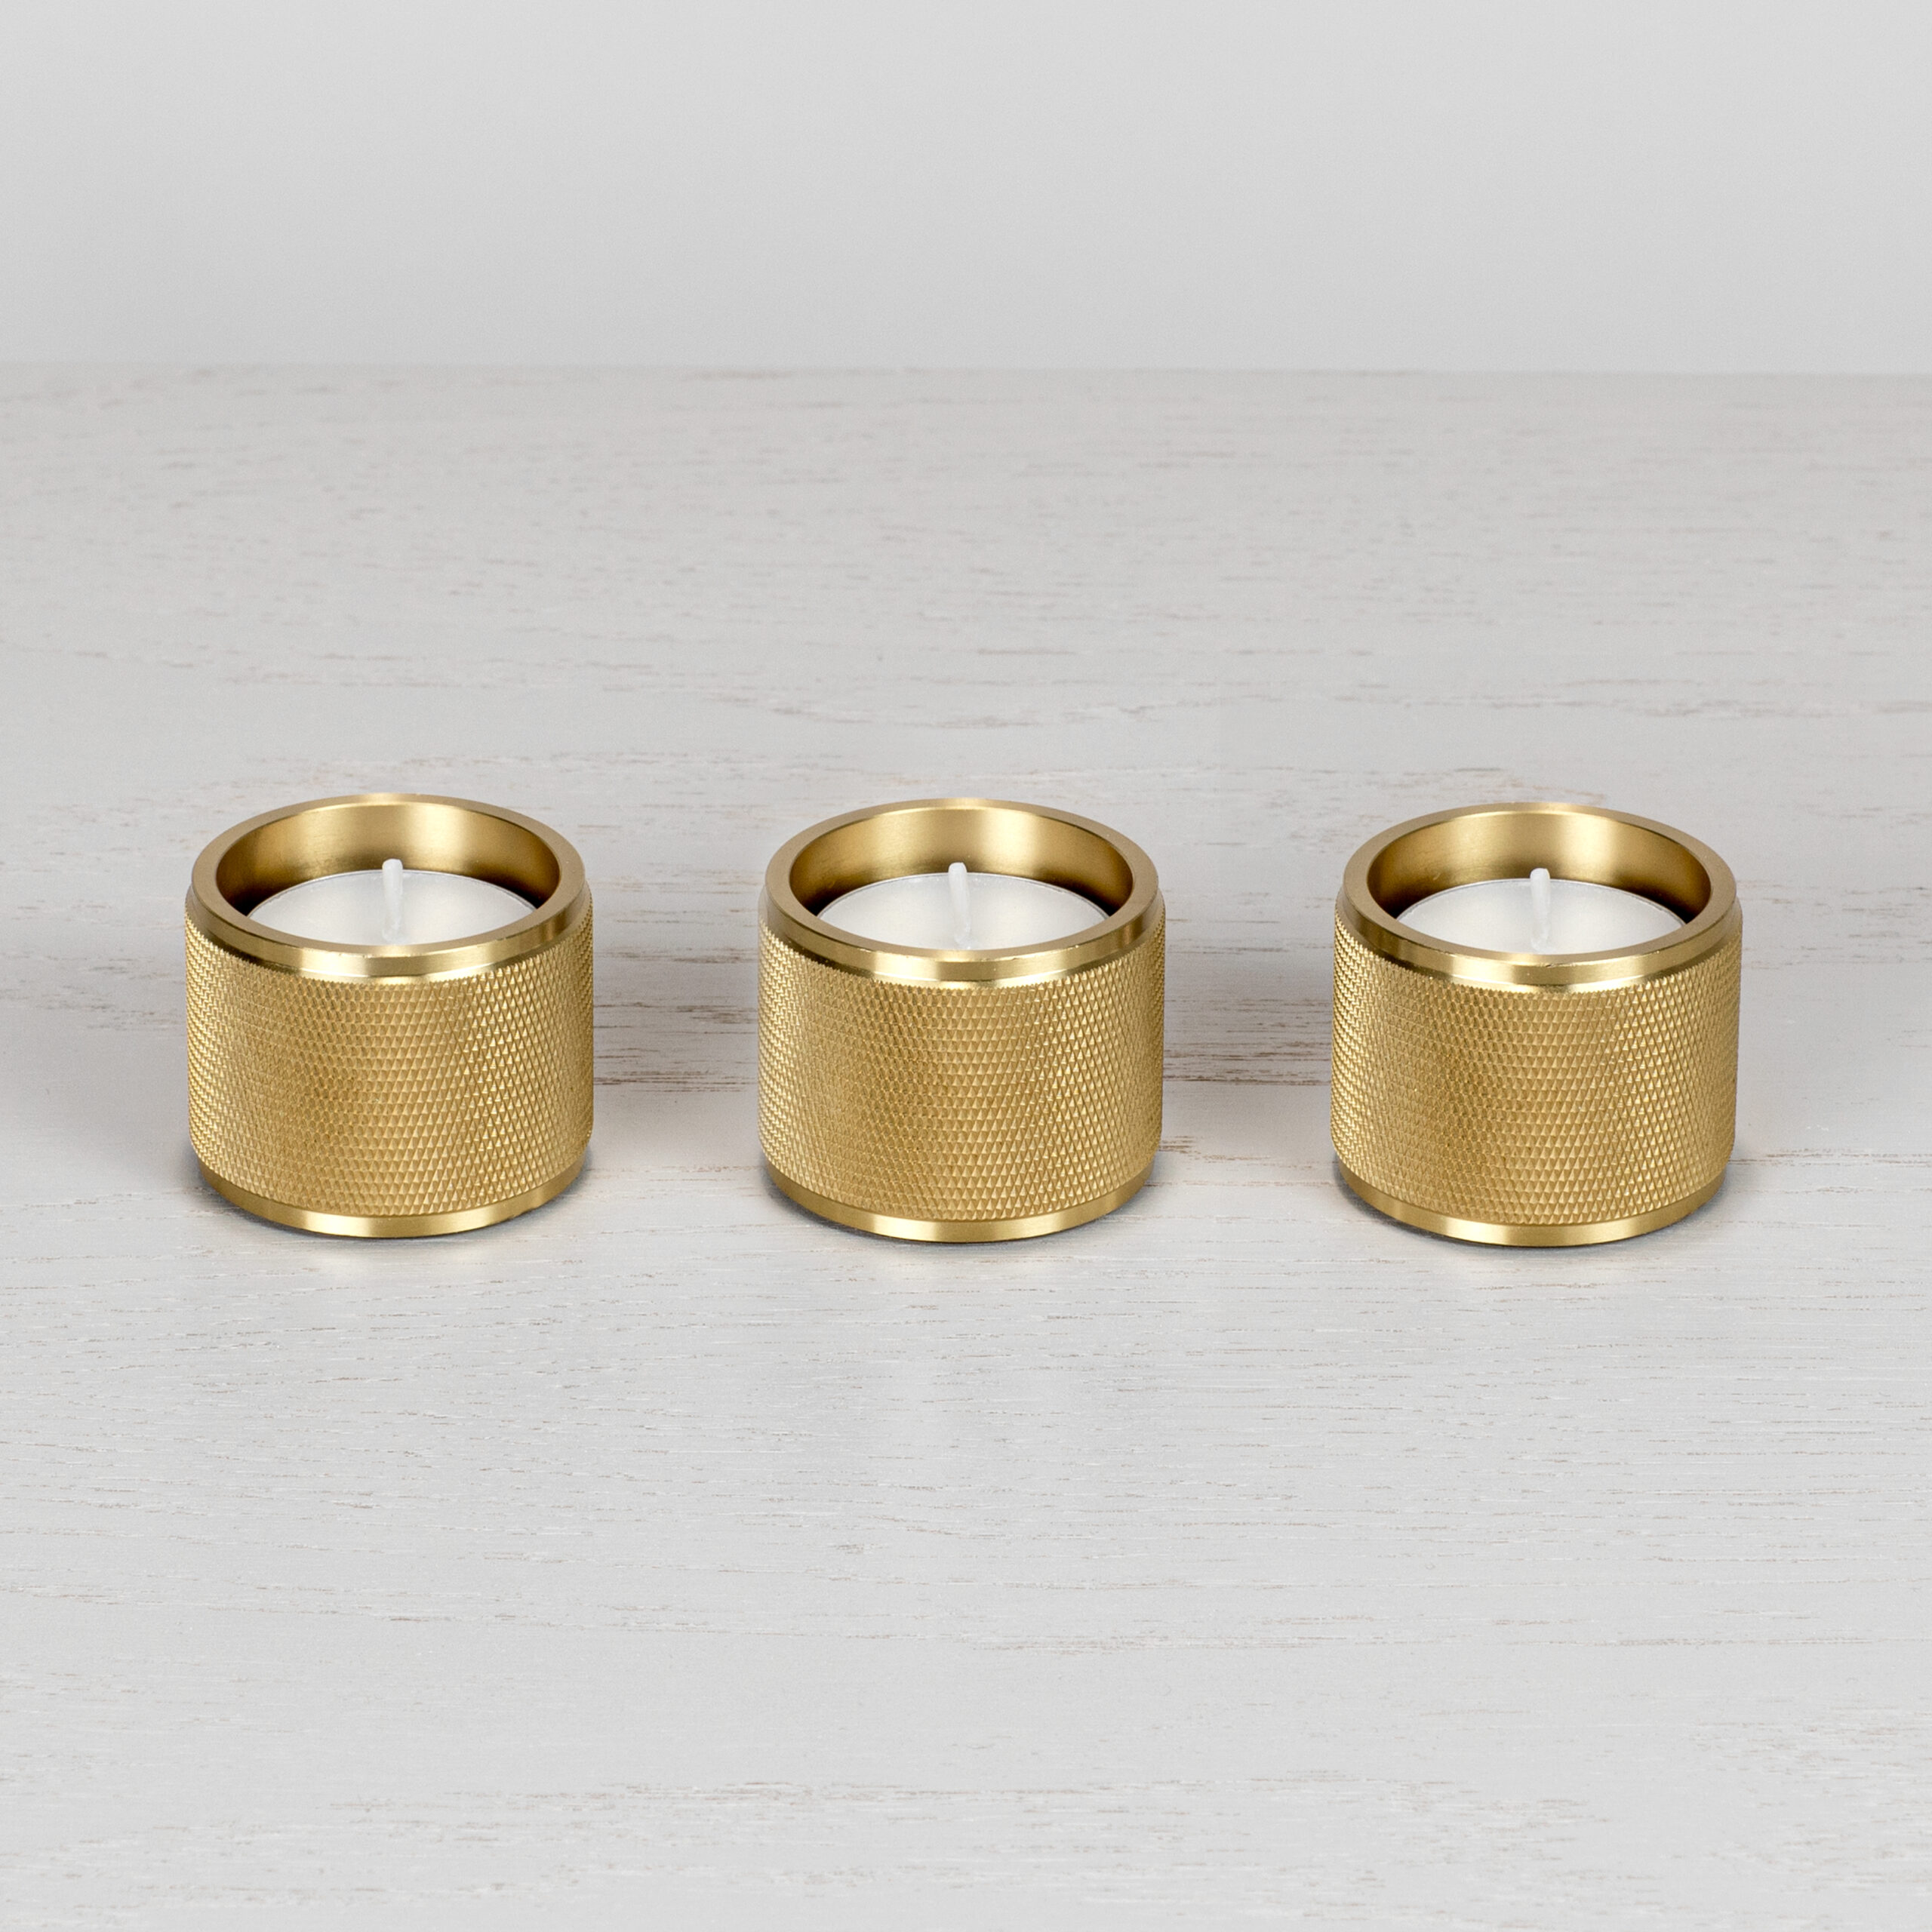 https://www.busterandpunch.com/us/wp-content/uploads/sites/2/2020/08/1.-BusterPunch_Tealight_Candle_Holders_Set-of-3_Brass_Front_off-scaled.jpg